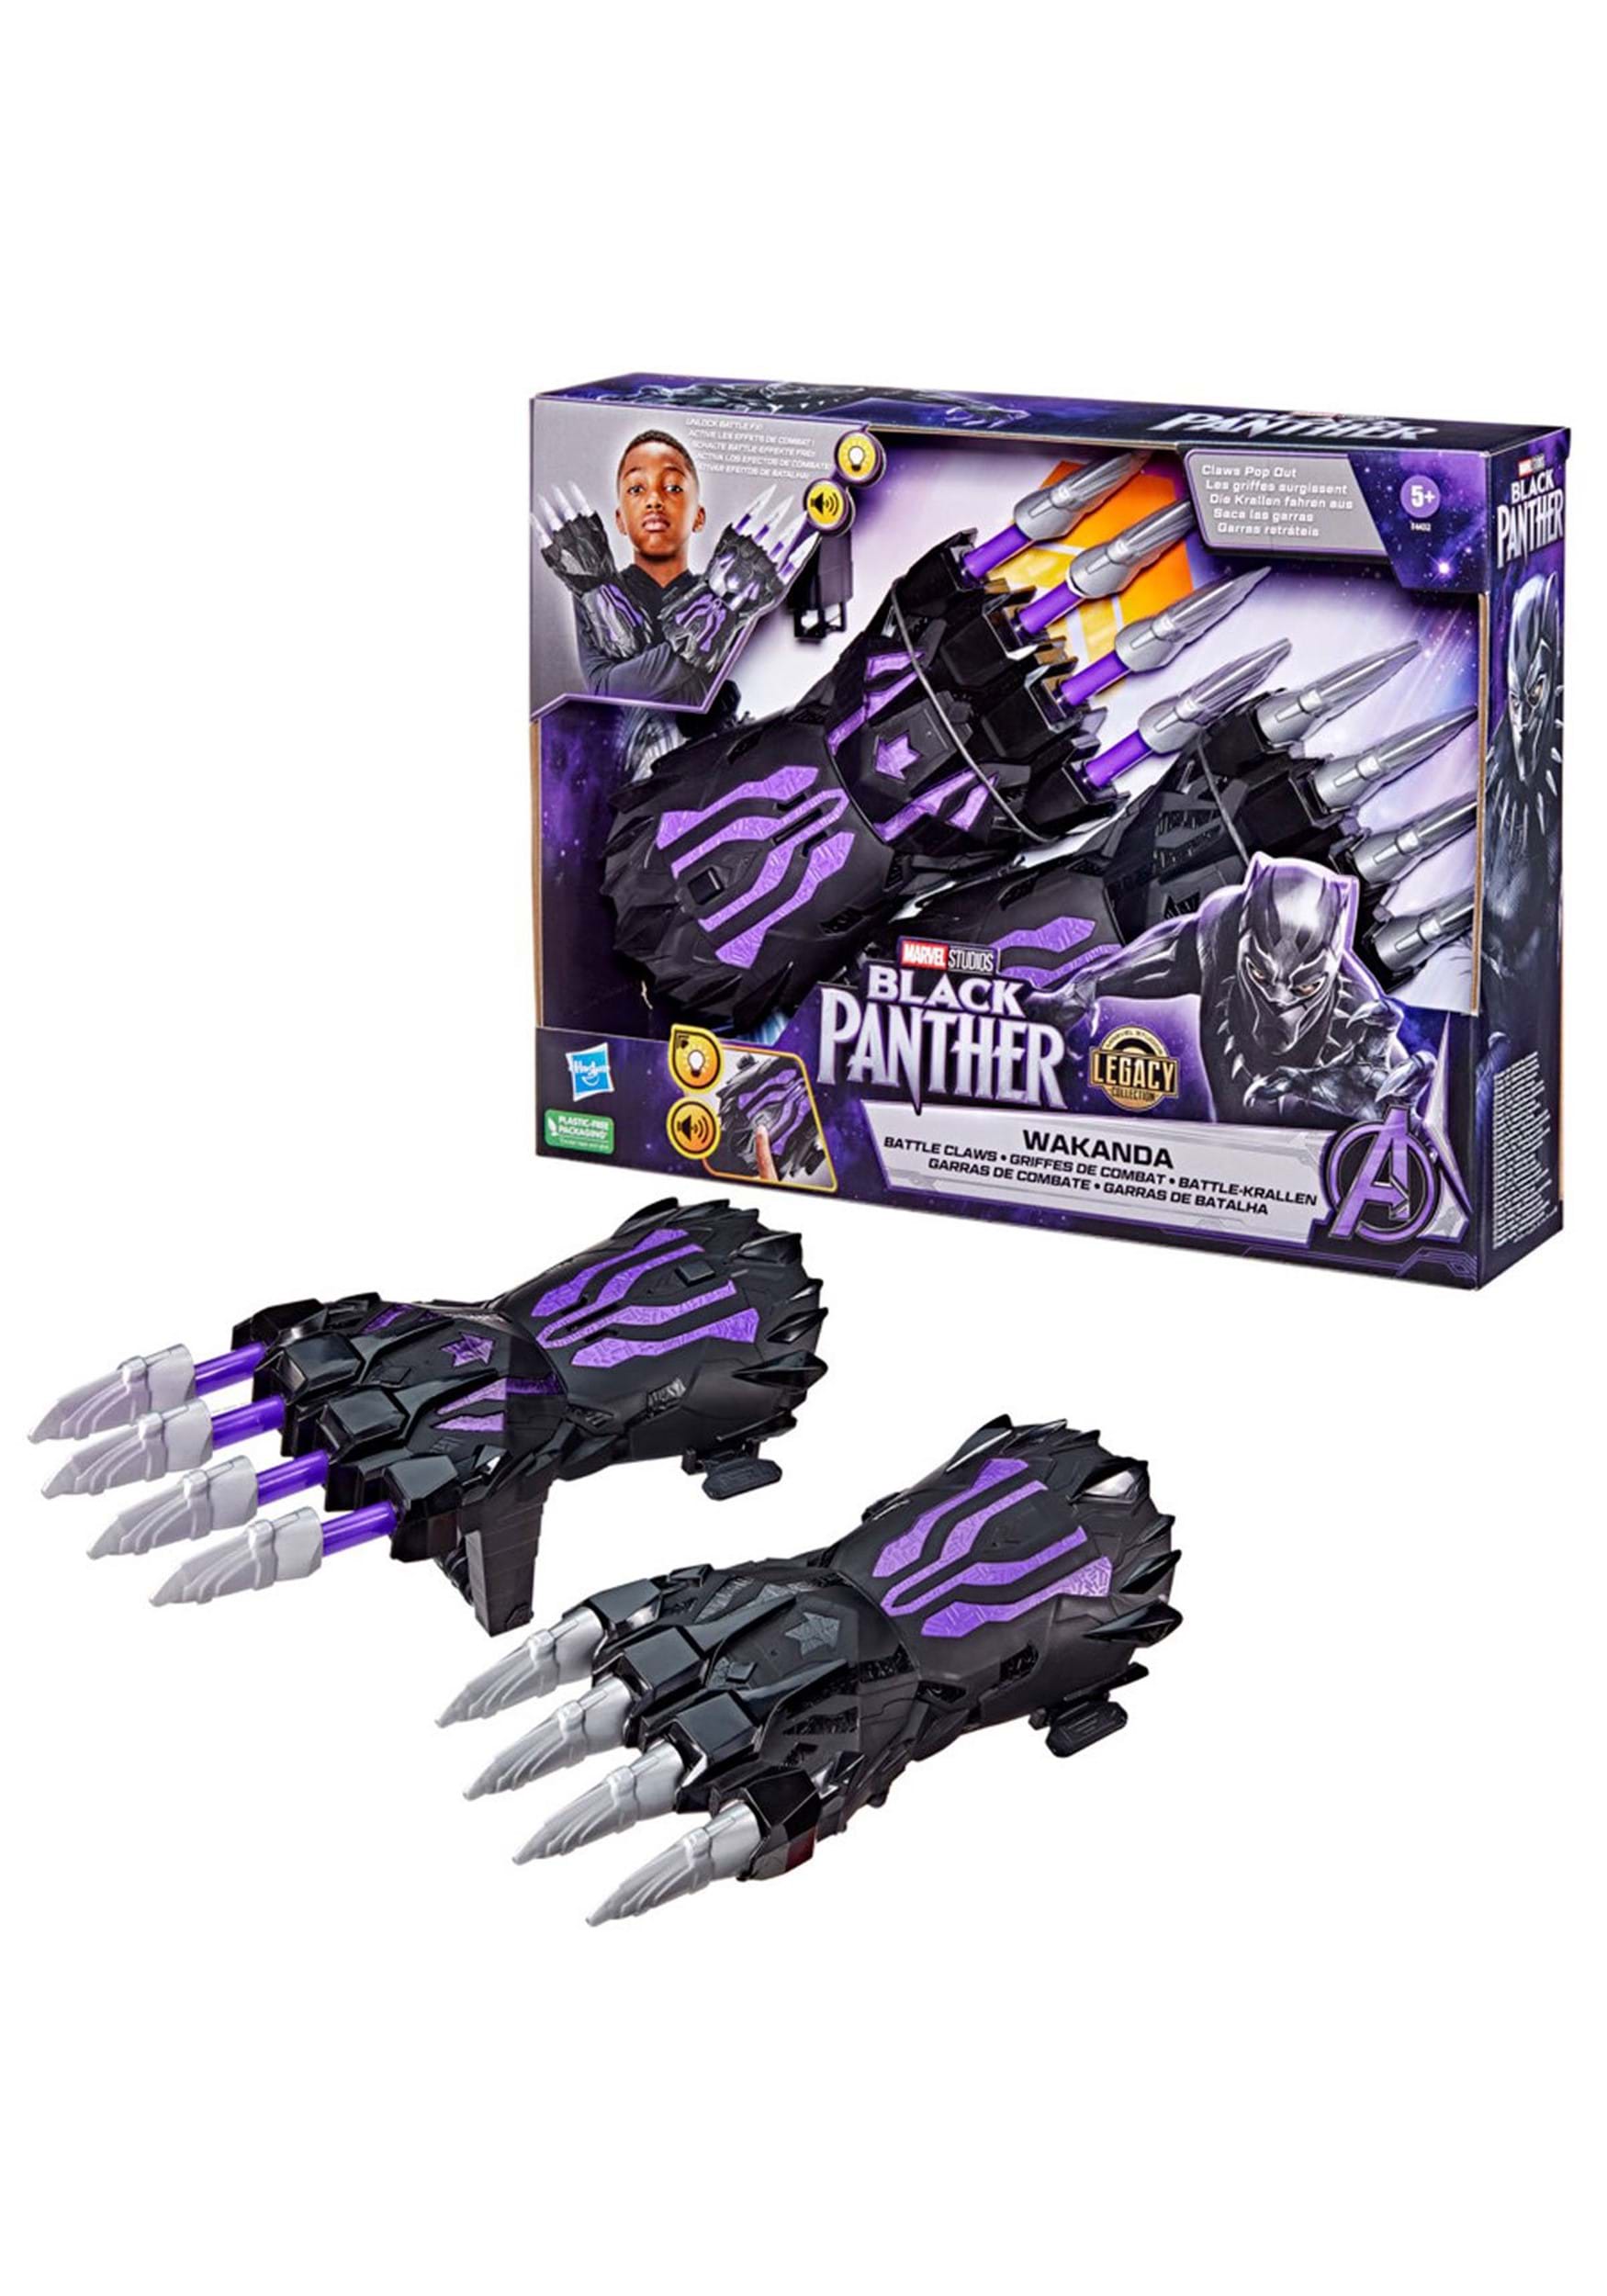 Black Panther Wakanda Battle Claws Accessories